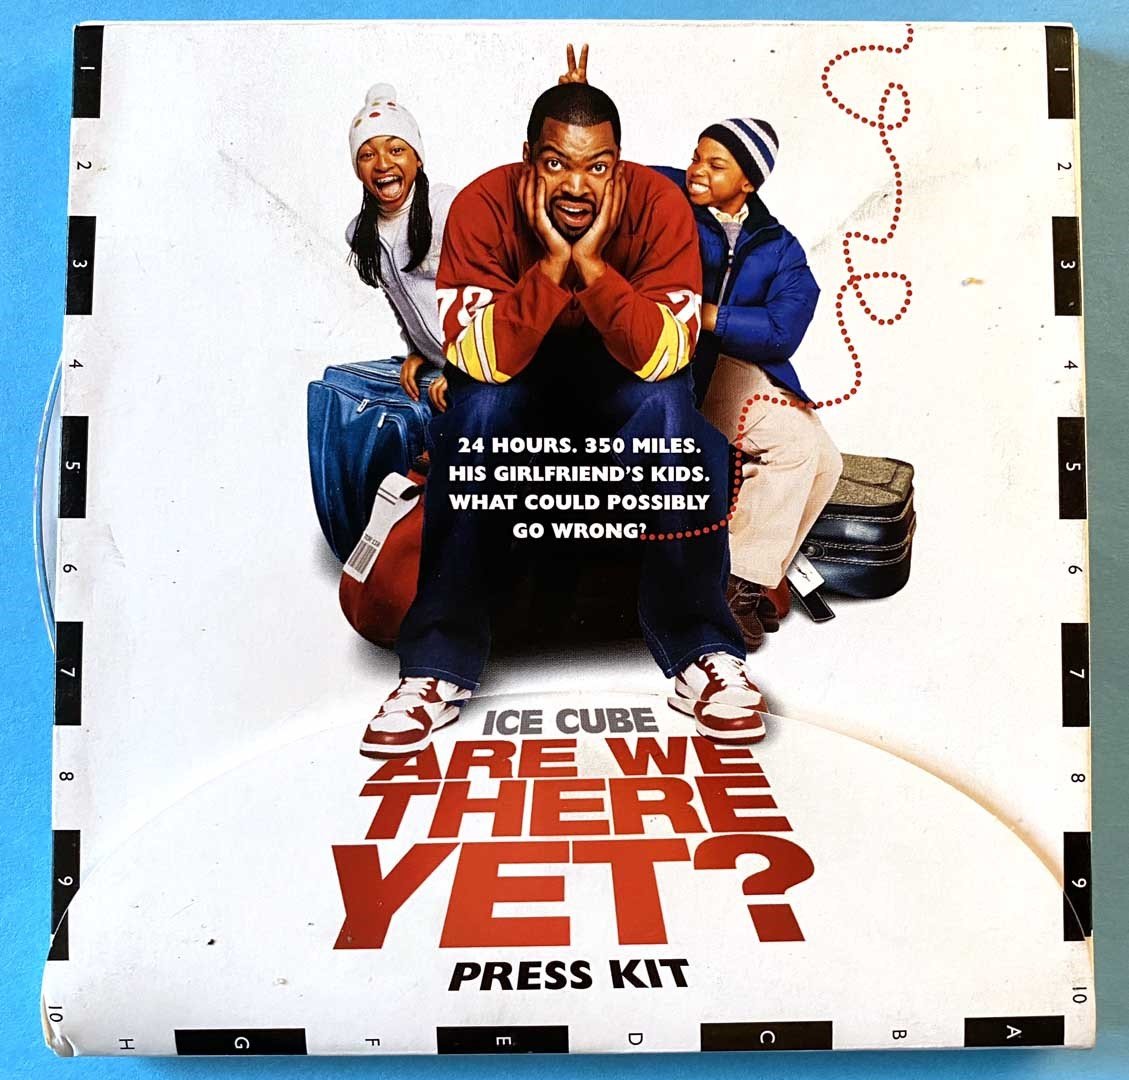 Ice Cube ARE WE THERE YET Nia Long press kit 2005